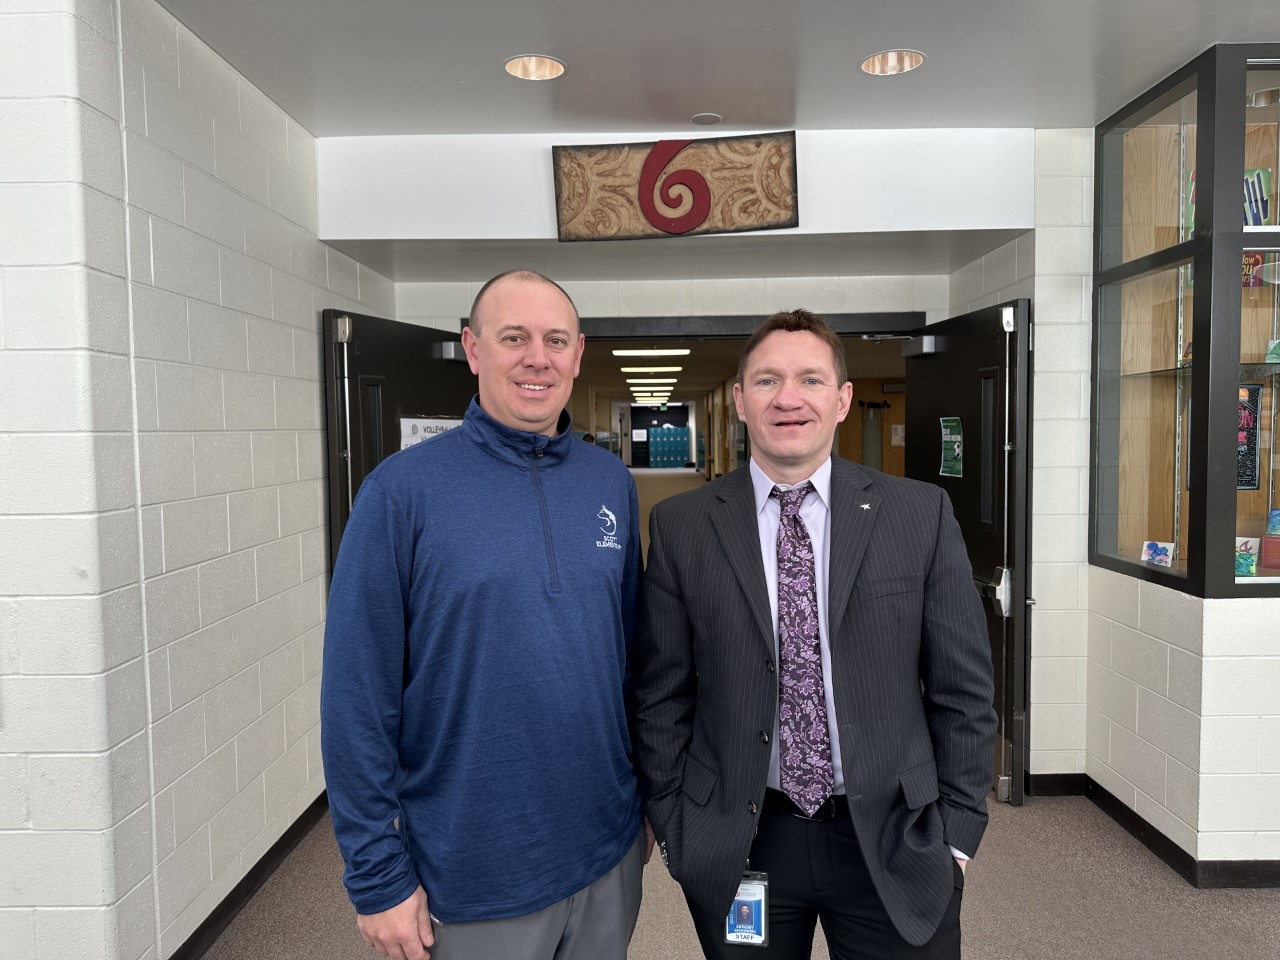 (Left to Right) Area Superintendent Darren Joiner and Jenkins Middle School principal Tony Jackowski posing for a picture. This was one of two schools Joiner went to on his school visits that day.